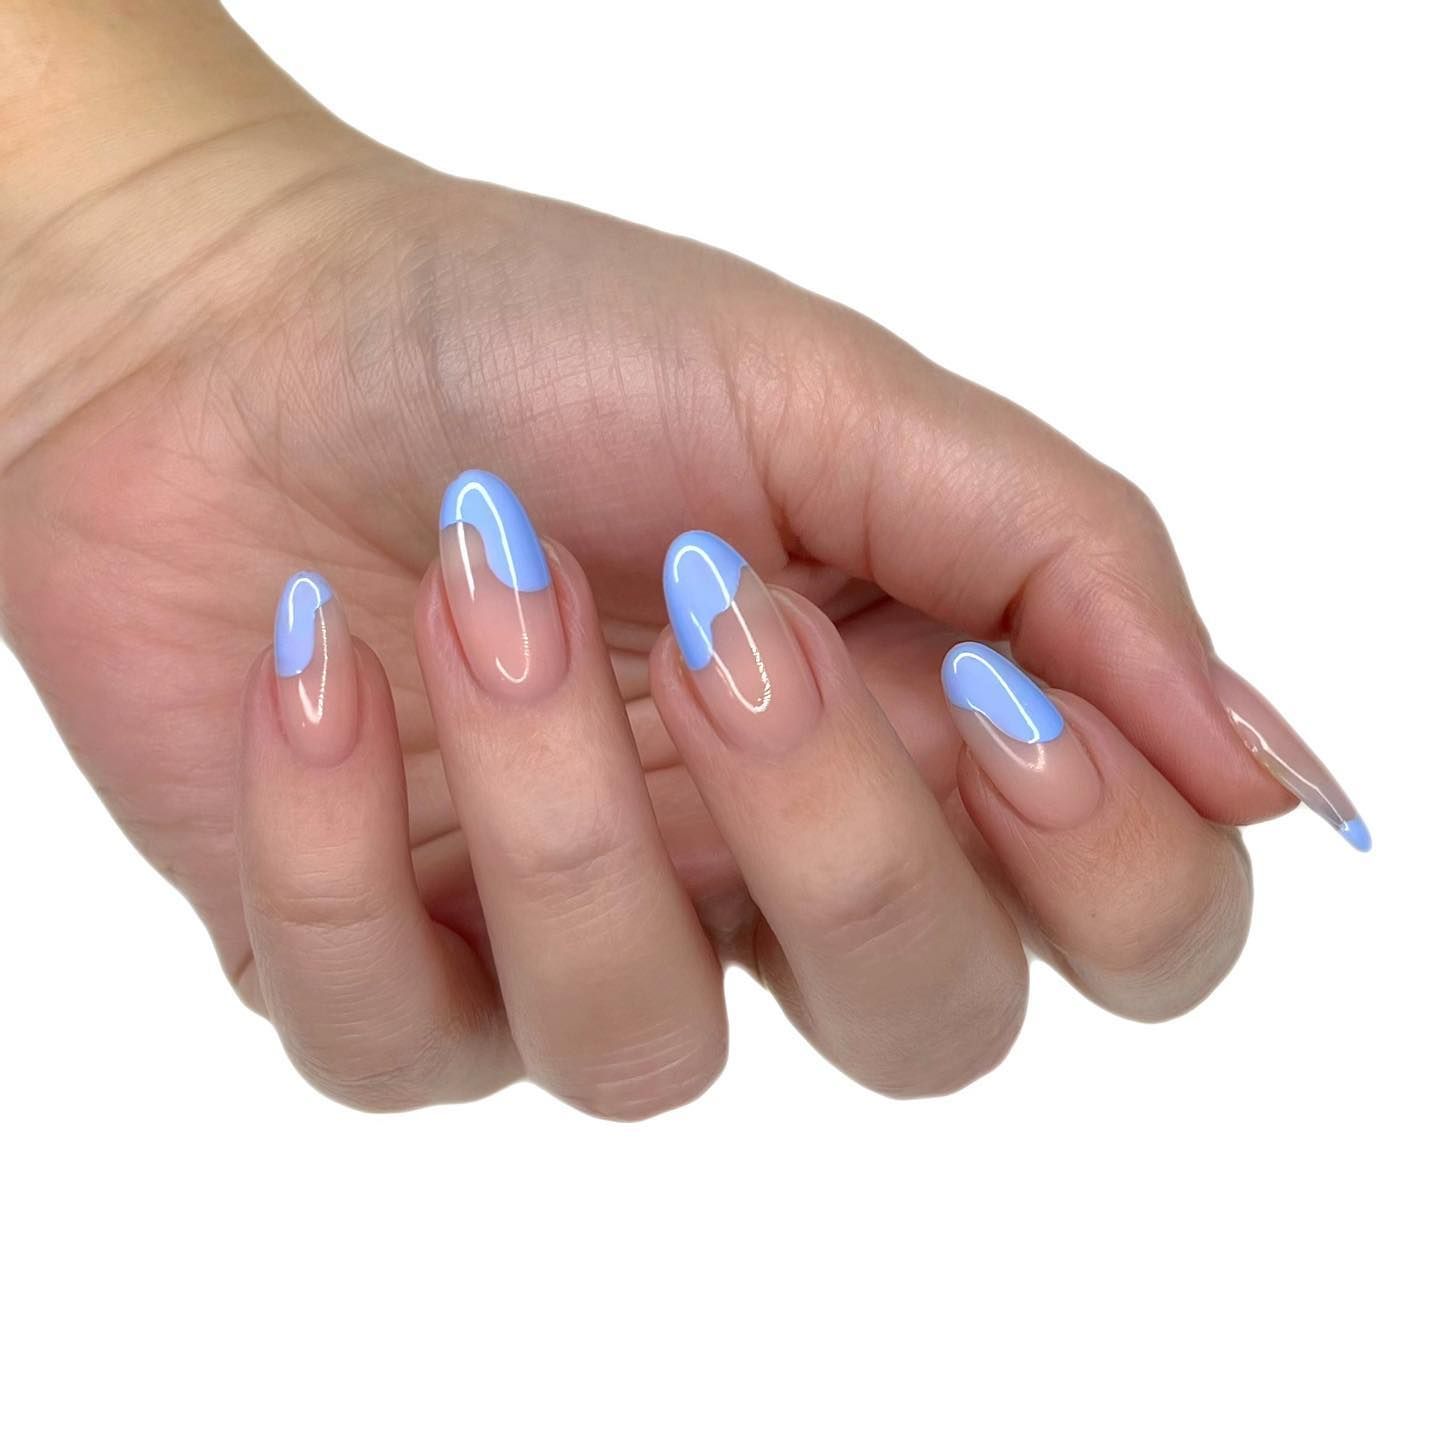 White Spots on Nails: Causes and Treatment